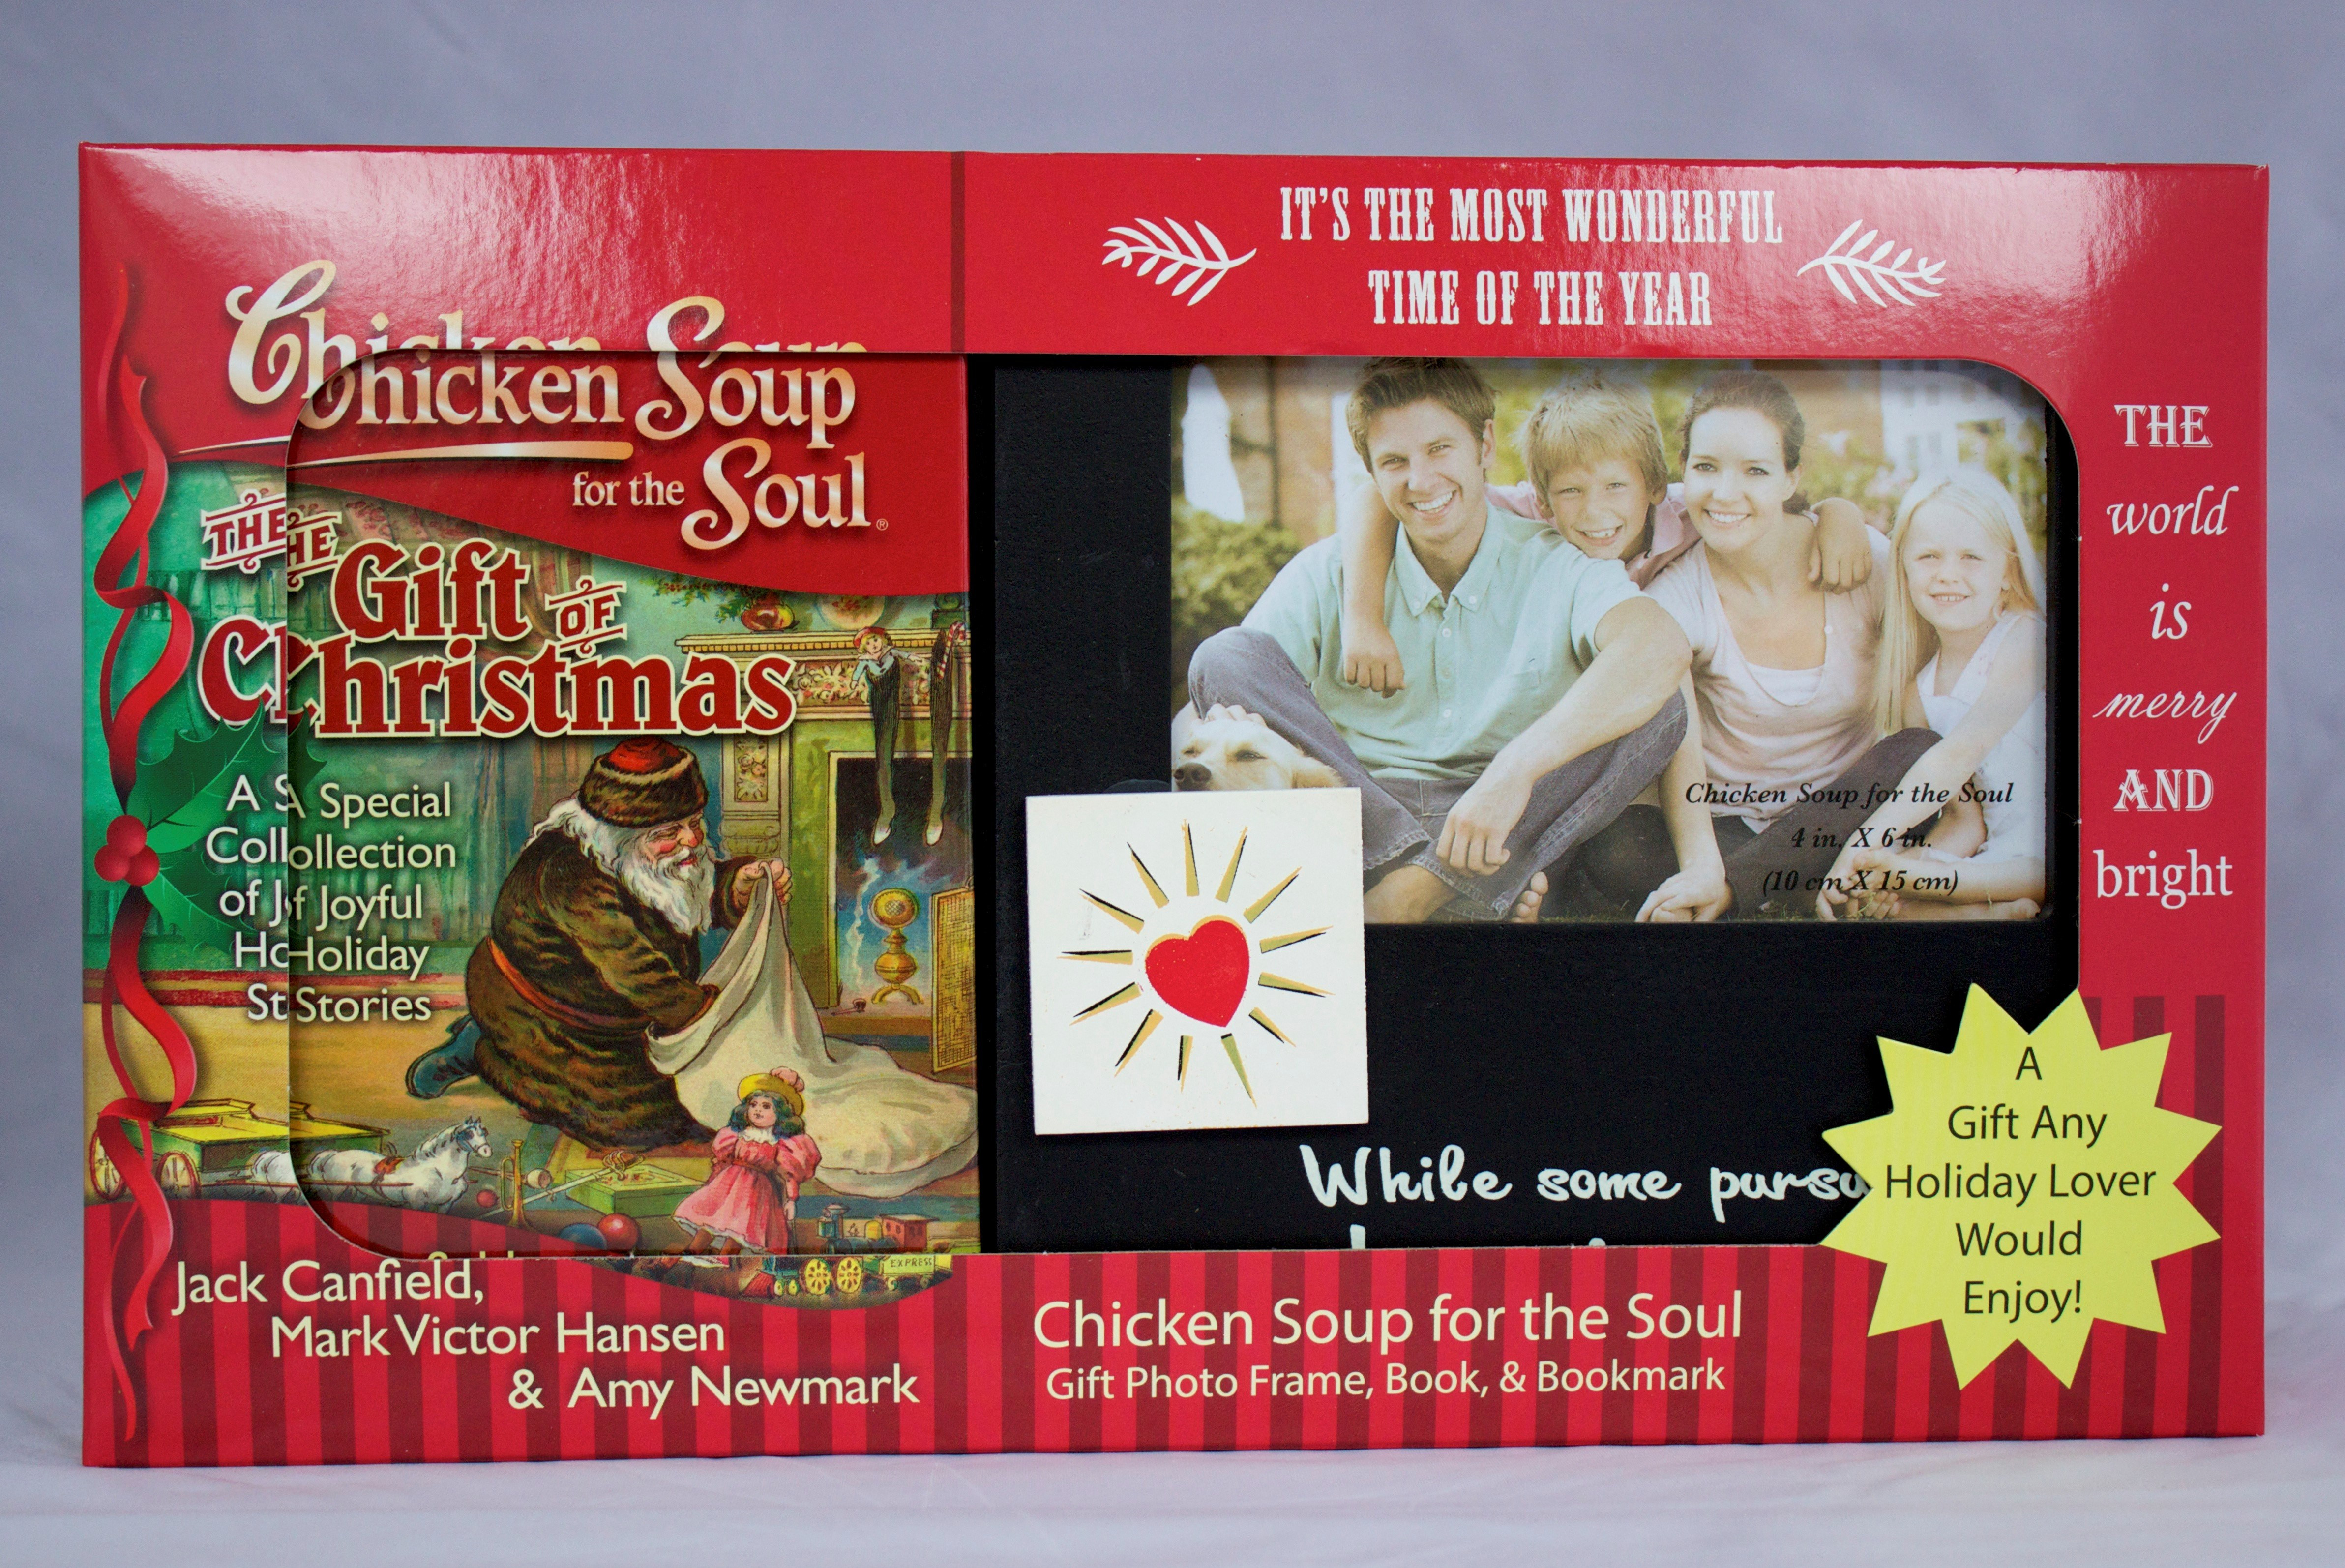 Chicken Soup For The Soul Christmas
 Days 4 5 6 and 7 of the Christmas Giveaways for Chicken